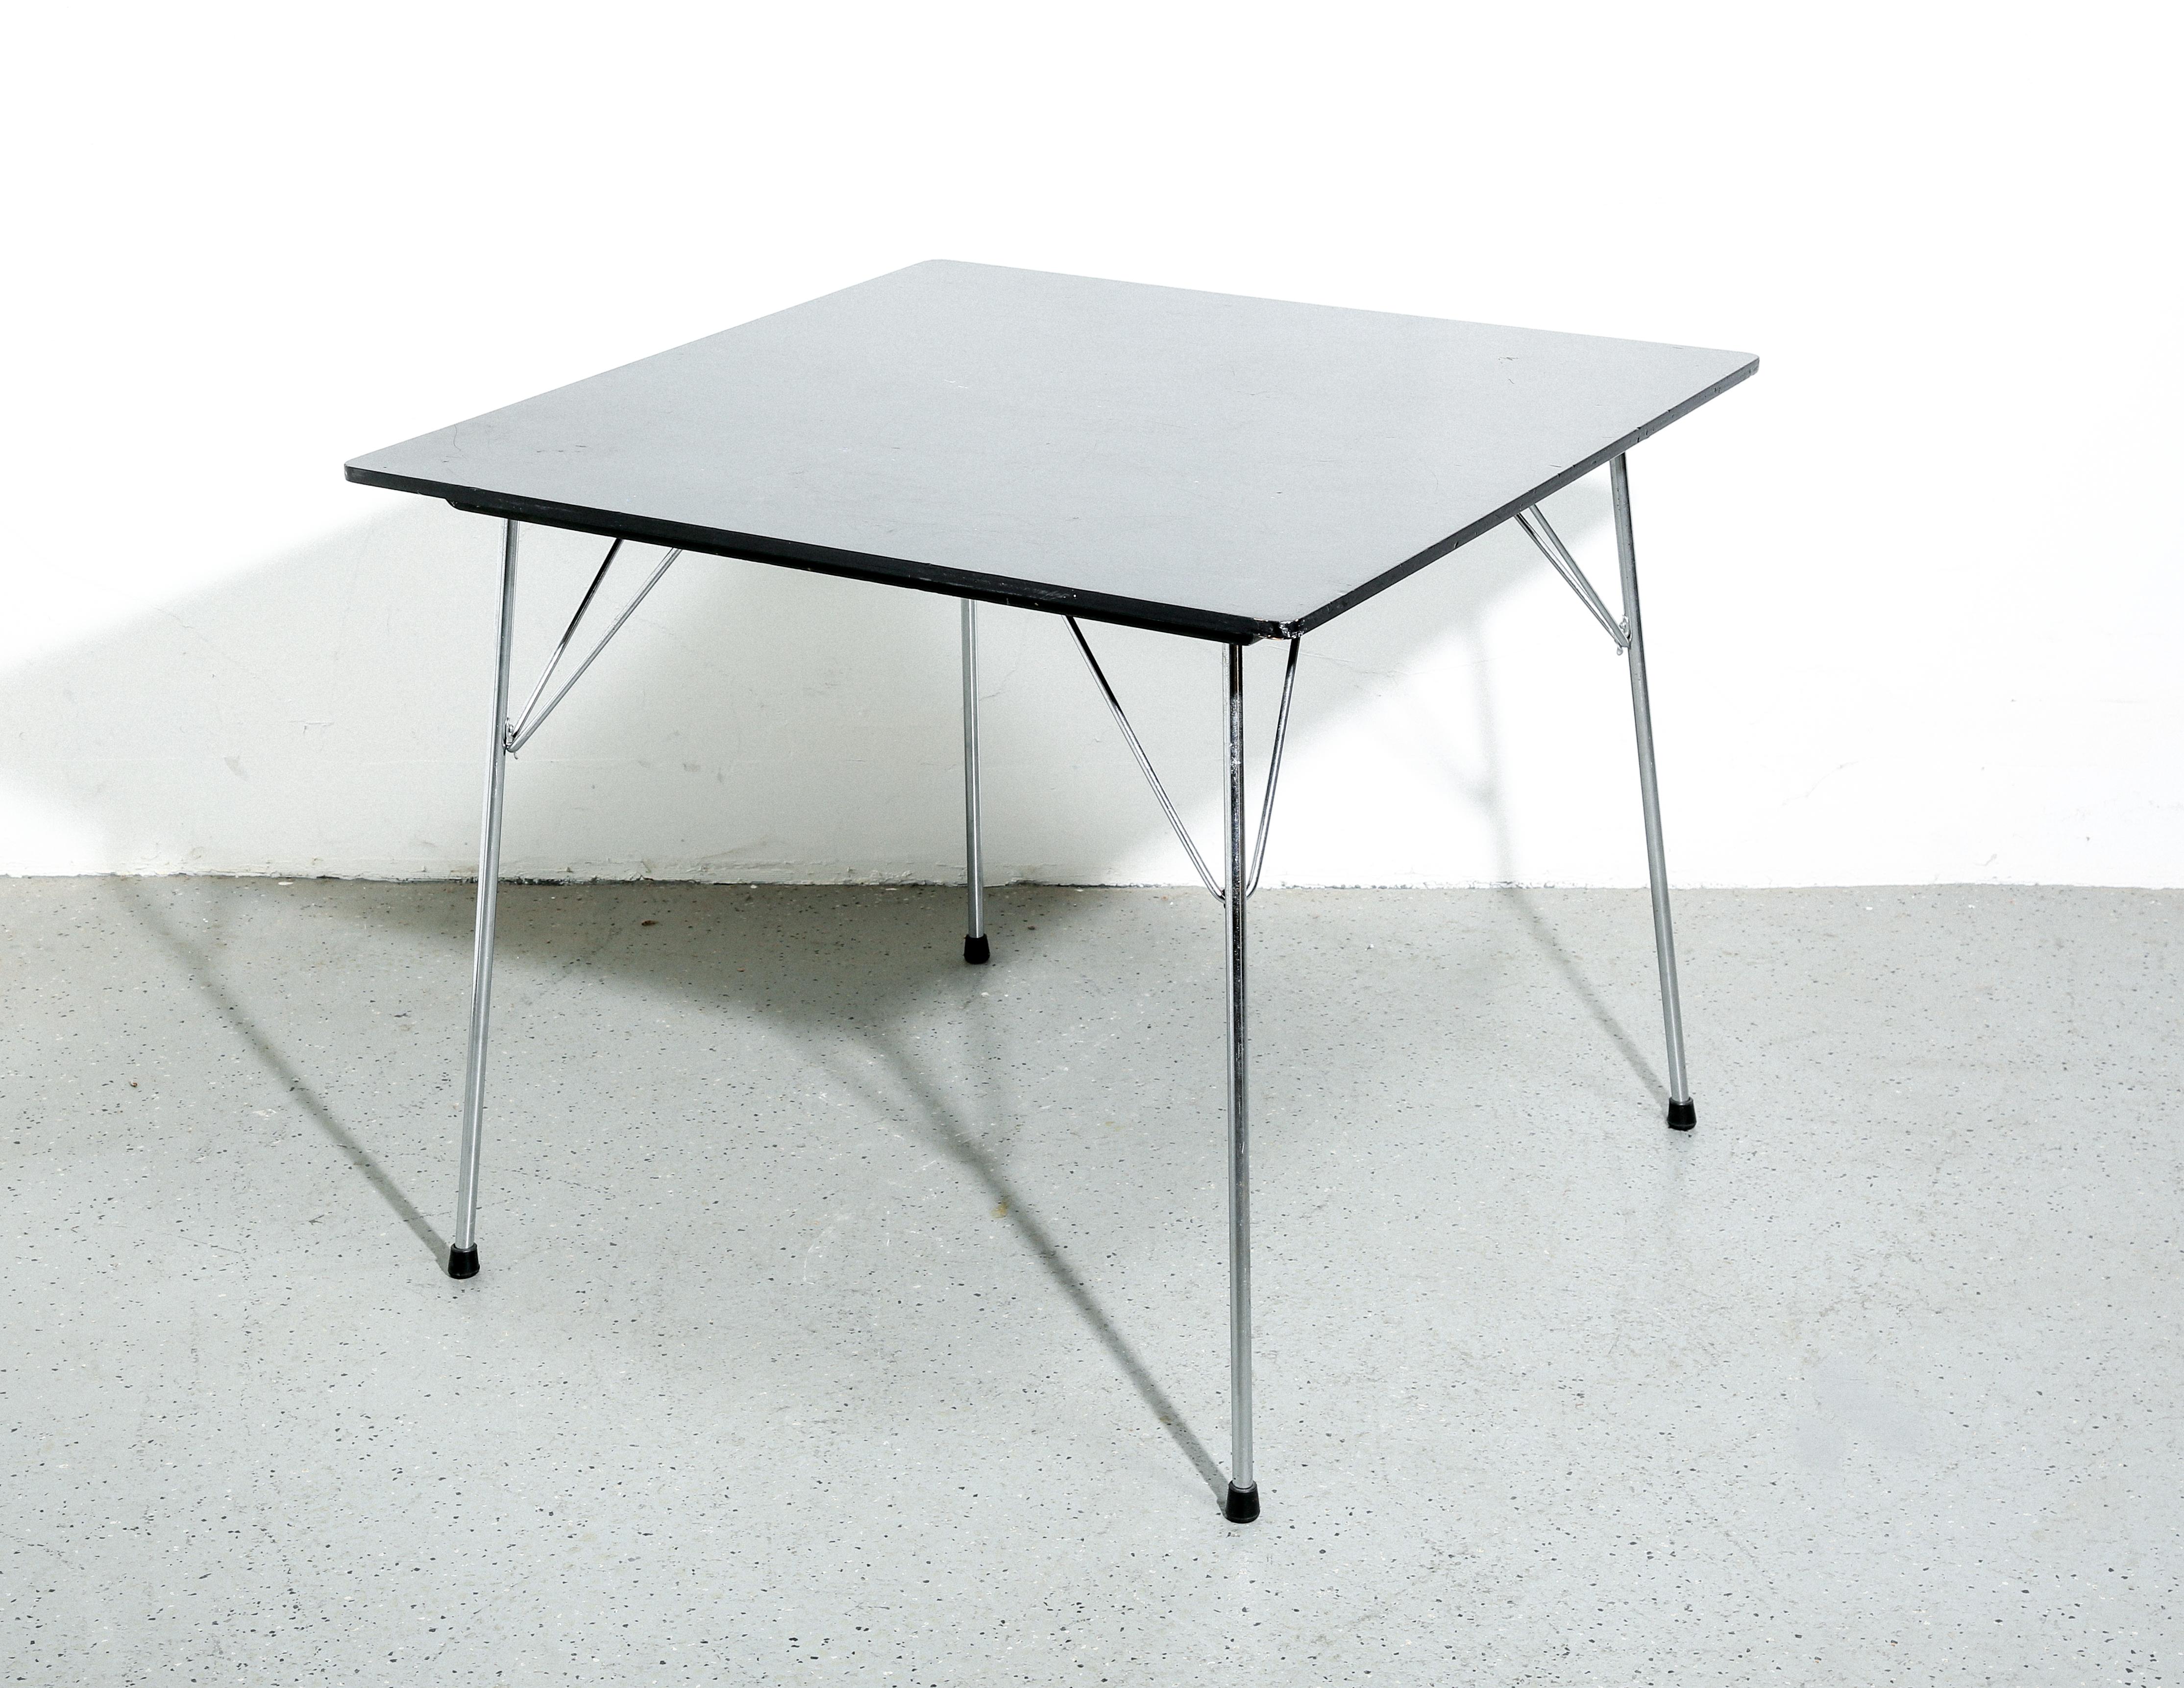 The Eames DTM-2 (Dining Table Metal) table is a classic example of mid-century modern design, reflecting the simple yet sophisticated aesthetic of its creators, Charles and Ray Eames. Introduced in the 1950s, this table was designed to be practical